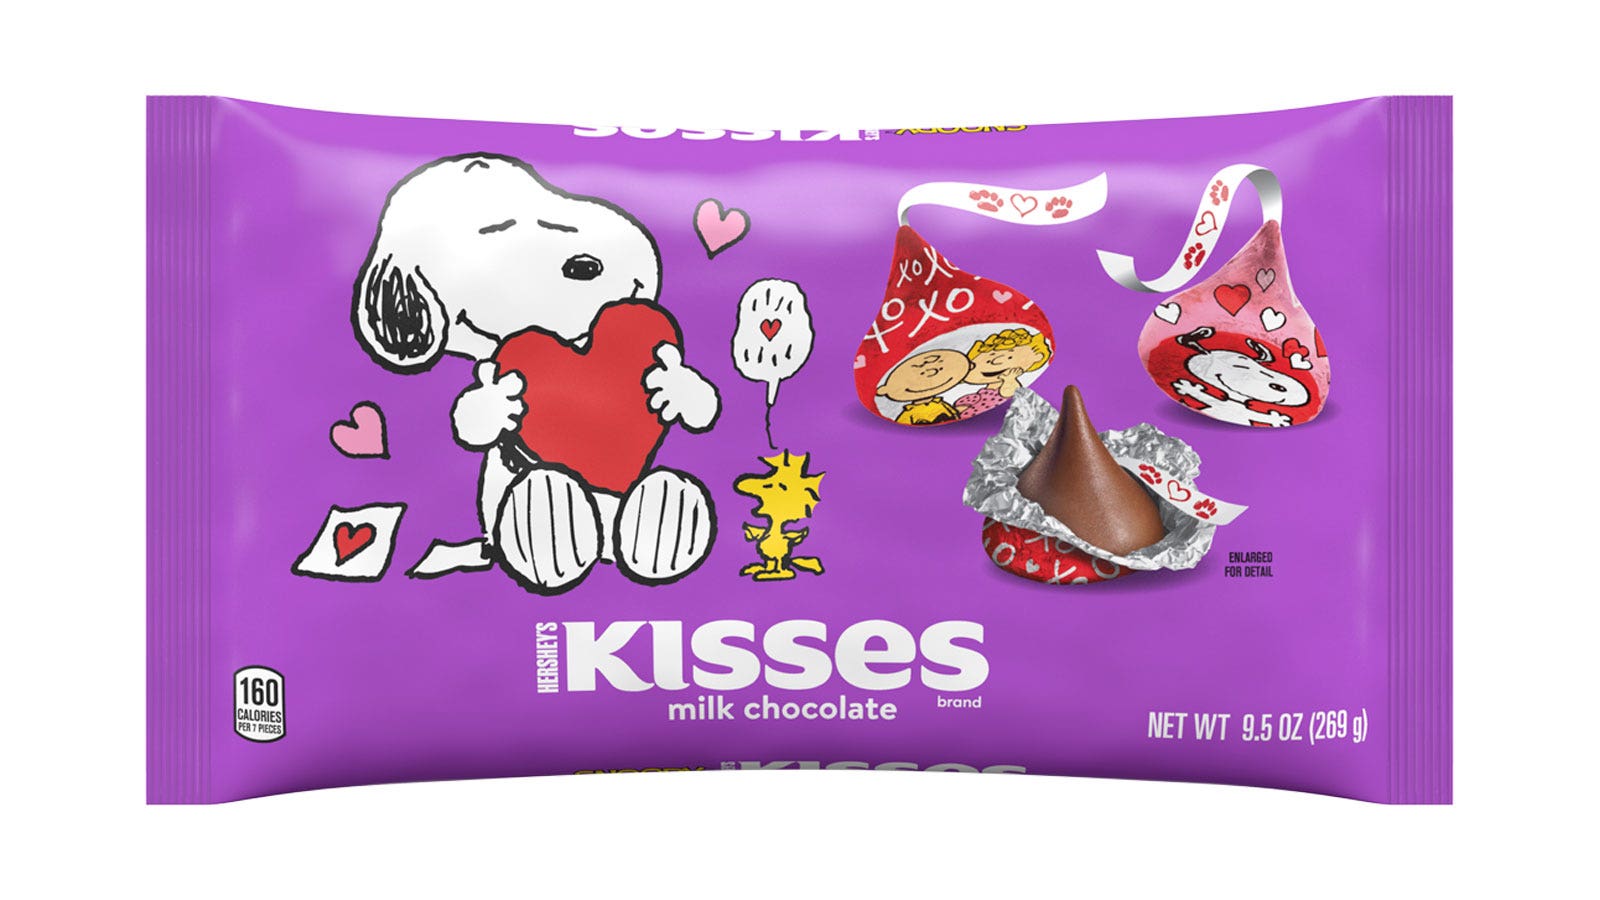 Hershey's Milk Chocolate Kisses featuring Snoopy